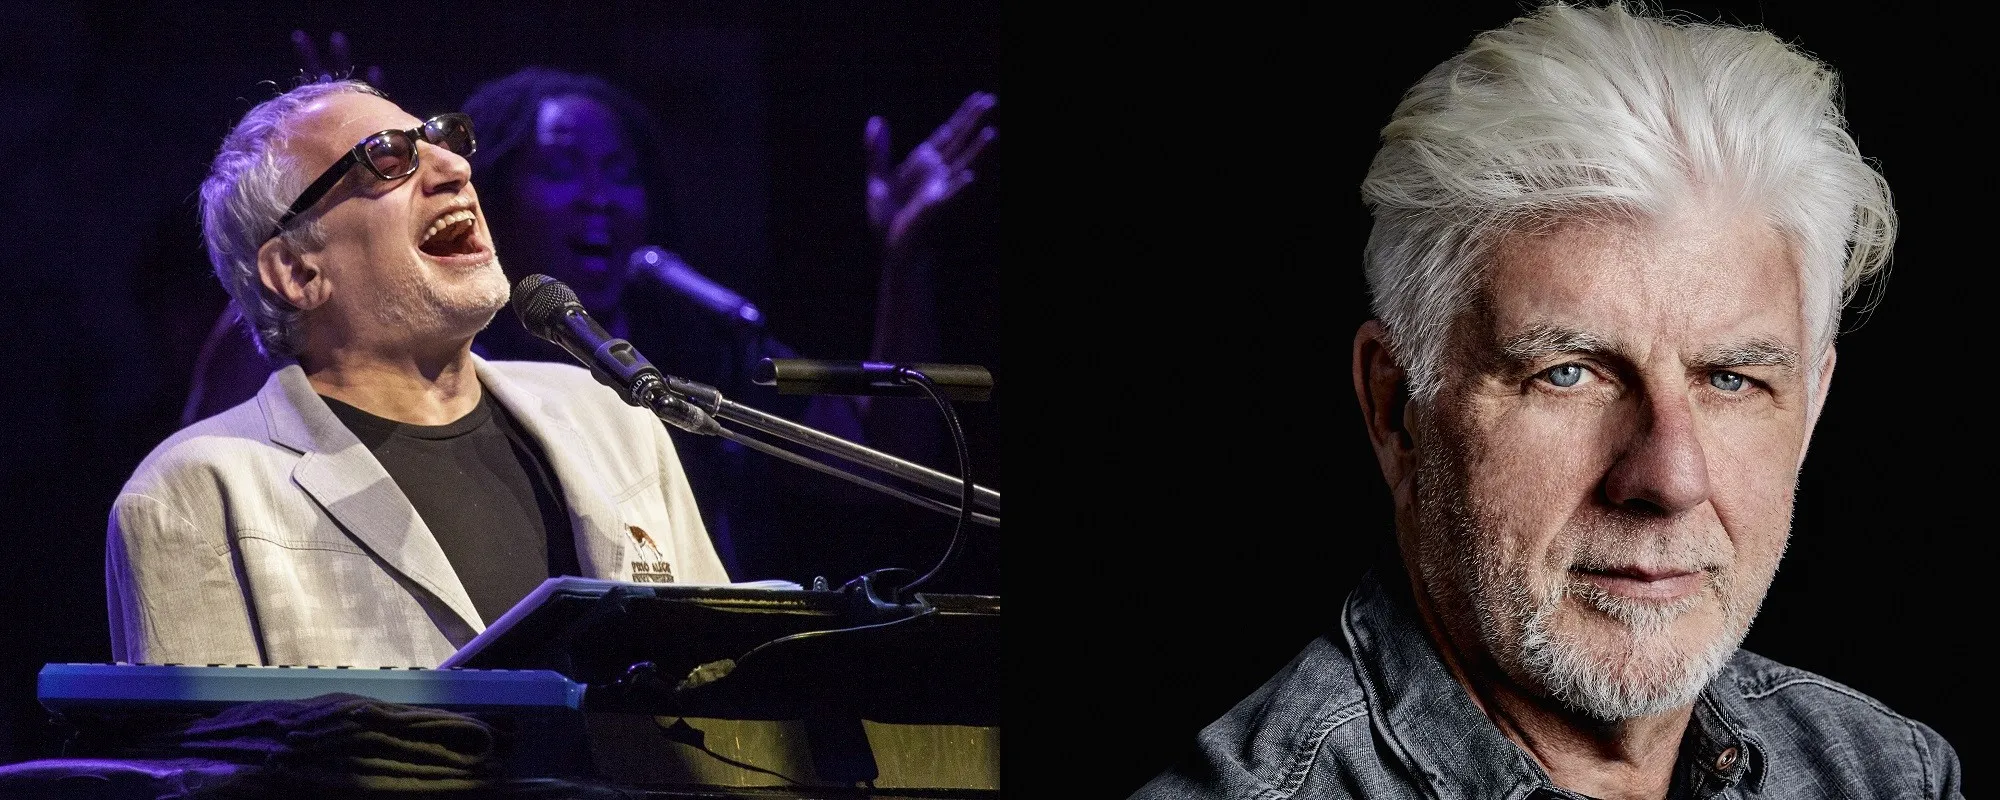 Donald Fagen Says He Regrets That Michael McDonald Didn’t Replace Him as Steely Dan’s Lead Singer